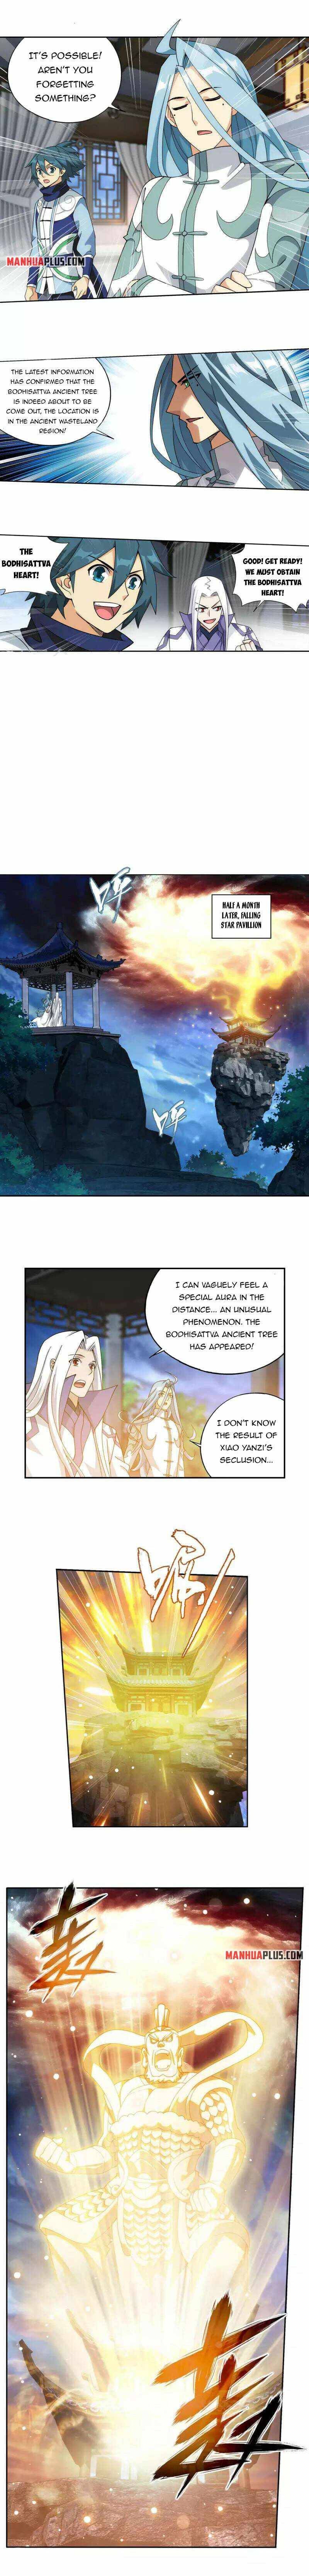 Doupo Cangqiong Chapter 365 page 4